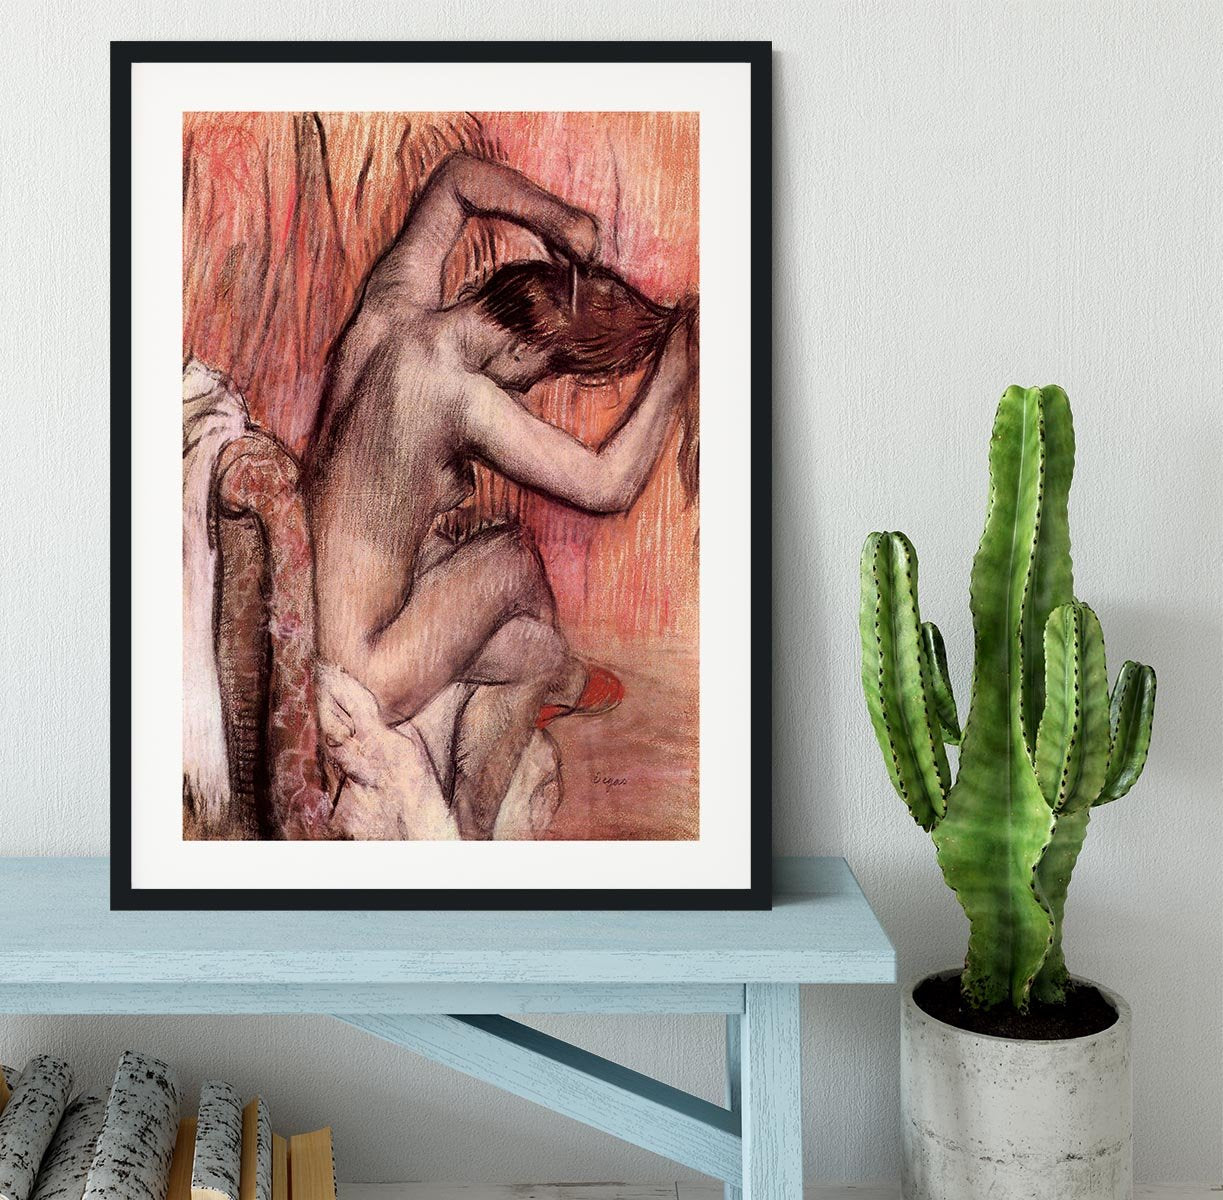 Sitting and brushing by Degas Framed Print - Canvas Art Rocks - 1